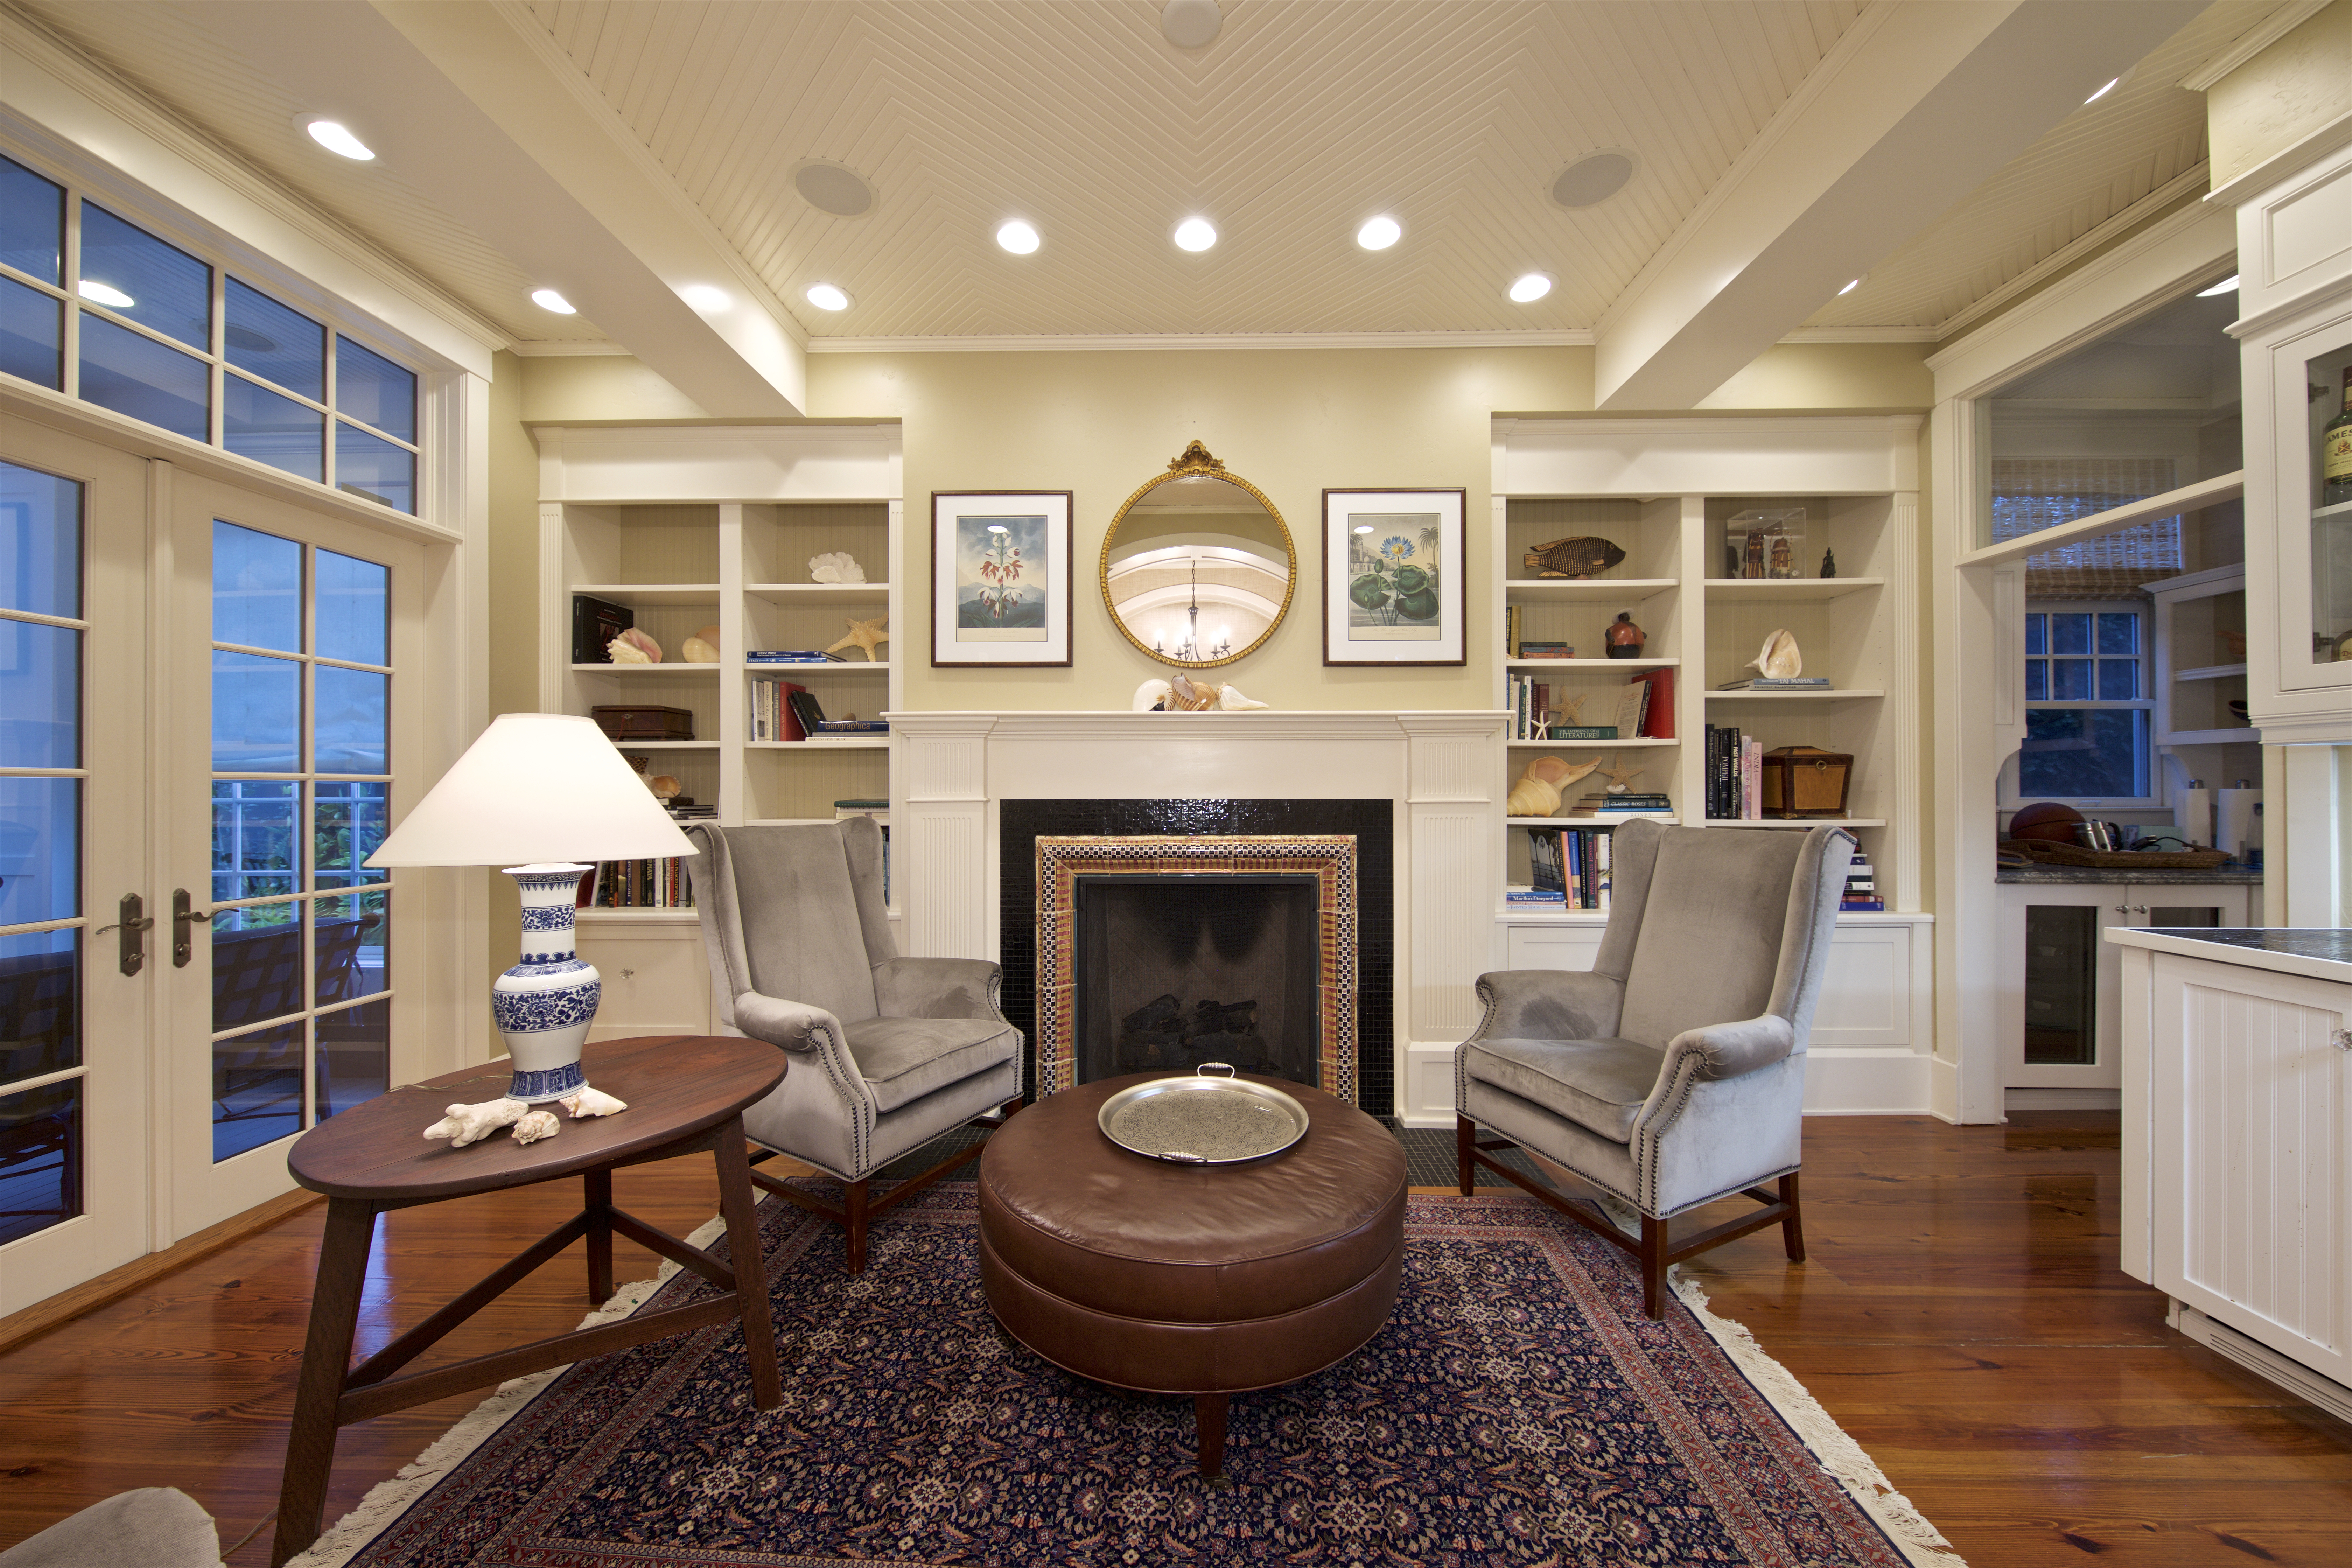 Traditional living room in Coronado home, with fireplace and built-in bookshelves